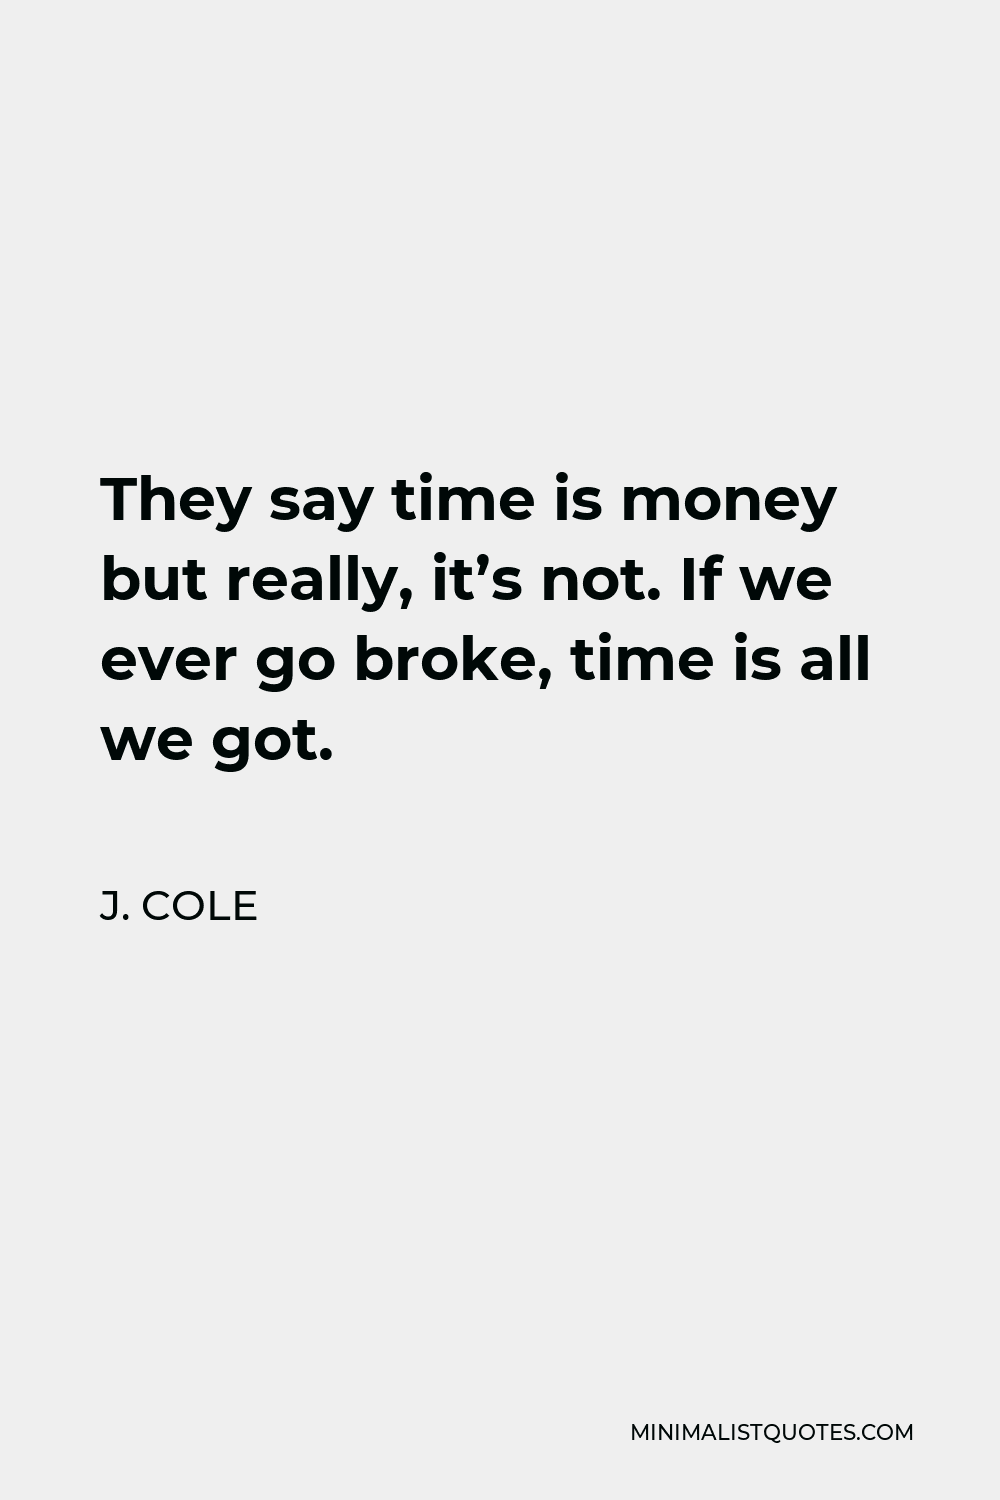 J. Cole Quote - They say time is money but really, it’s not. If we ever go broke, time is all we got.